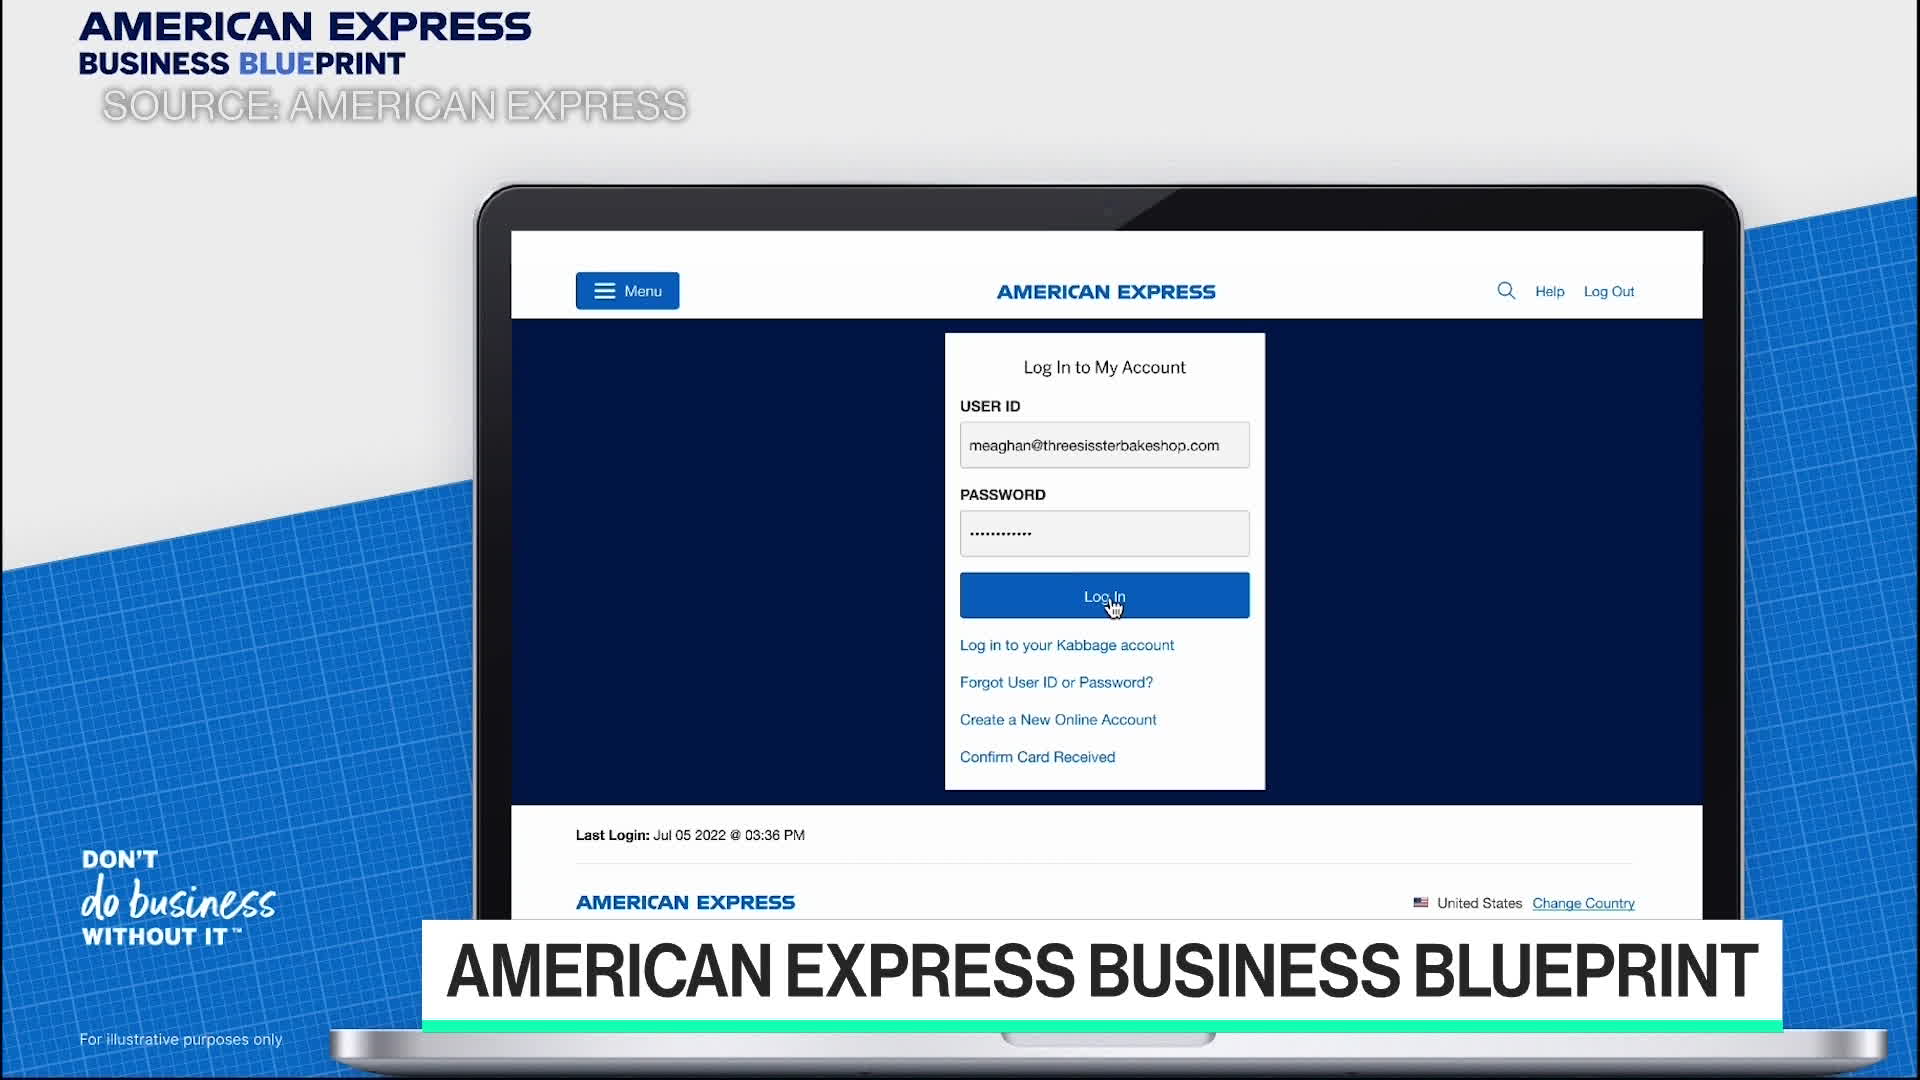 Watch American Express Expands Offerings to Small Businesses - Bloomberg